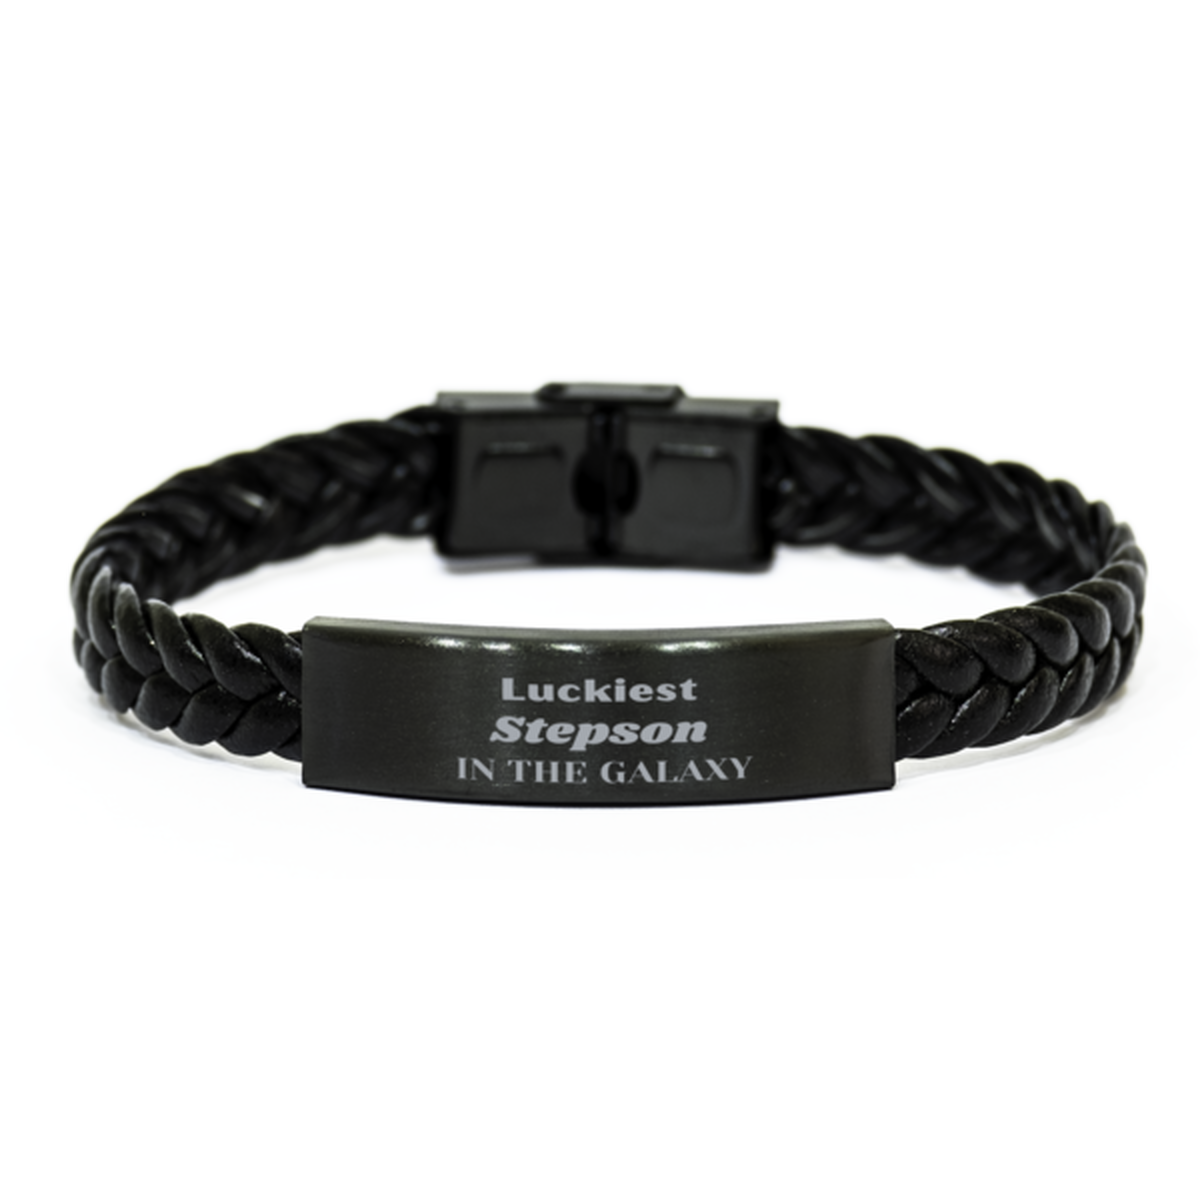 Luckiest Stepson in the Galaxy, To My Stepson Engraved Gifts, Christmas Stepson Braided Leather Bracelet Gifts, X-mas Birthday Unique Gifts For Stepson Men Women